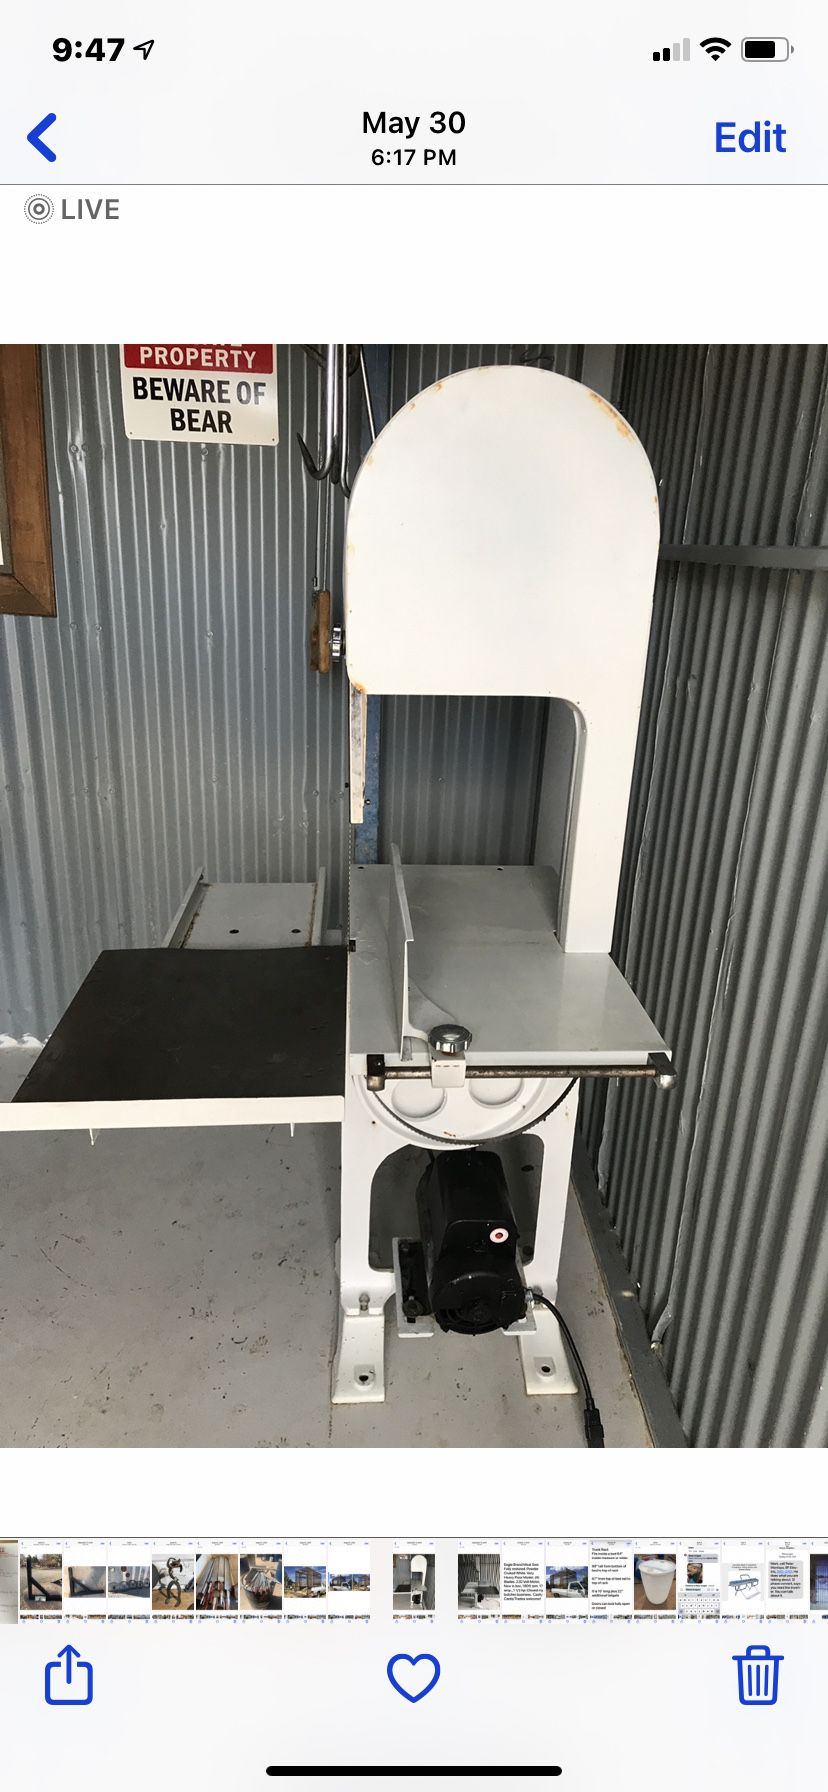 Comercial Meat Saw